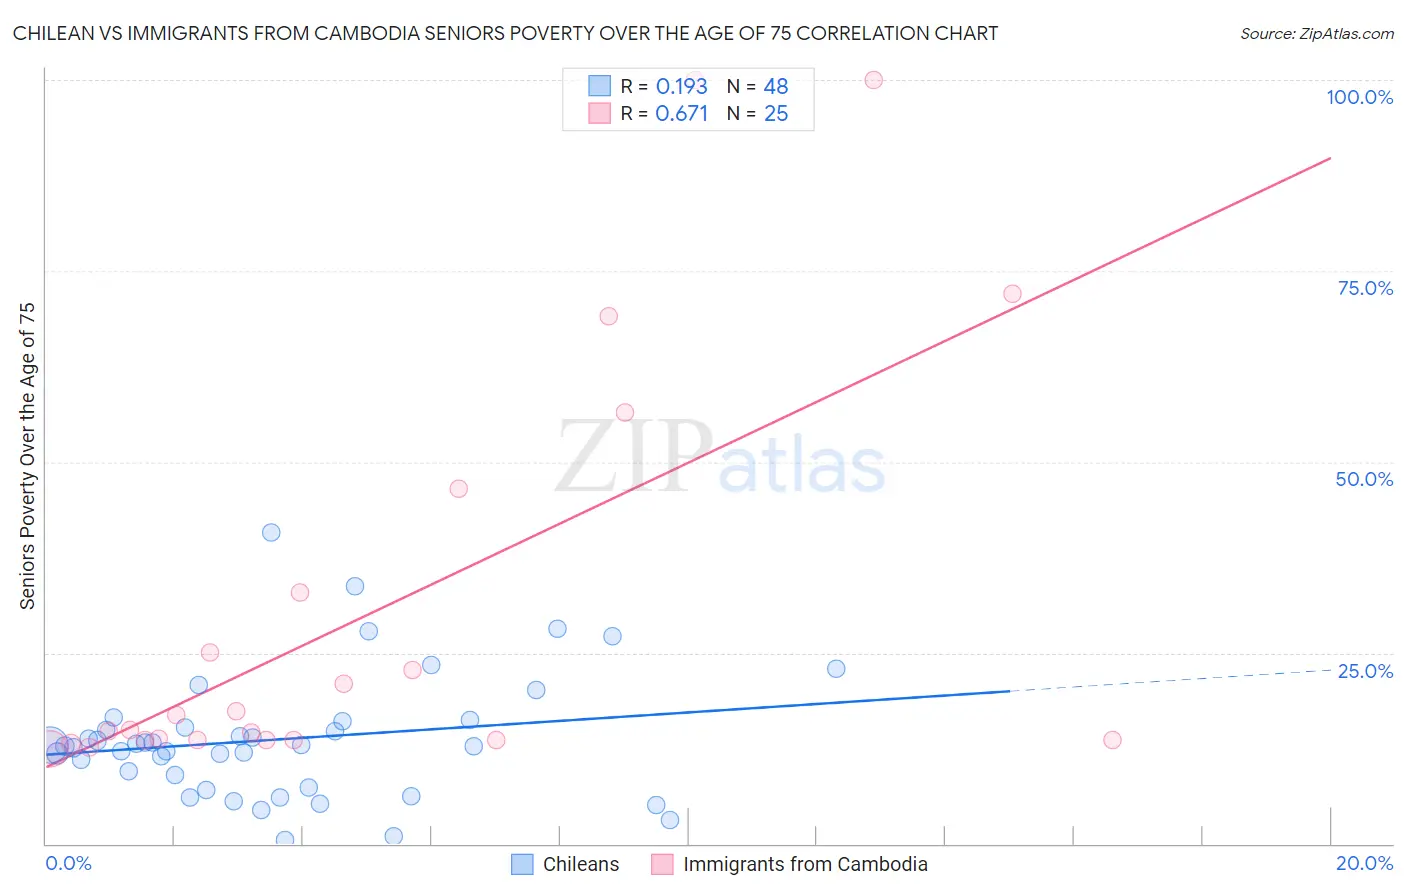 Chilean vs Immigrants from Cambodia Seniors Poverty Over the Age of 75